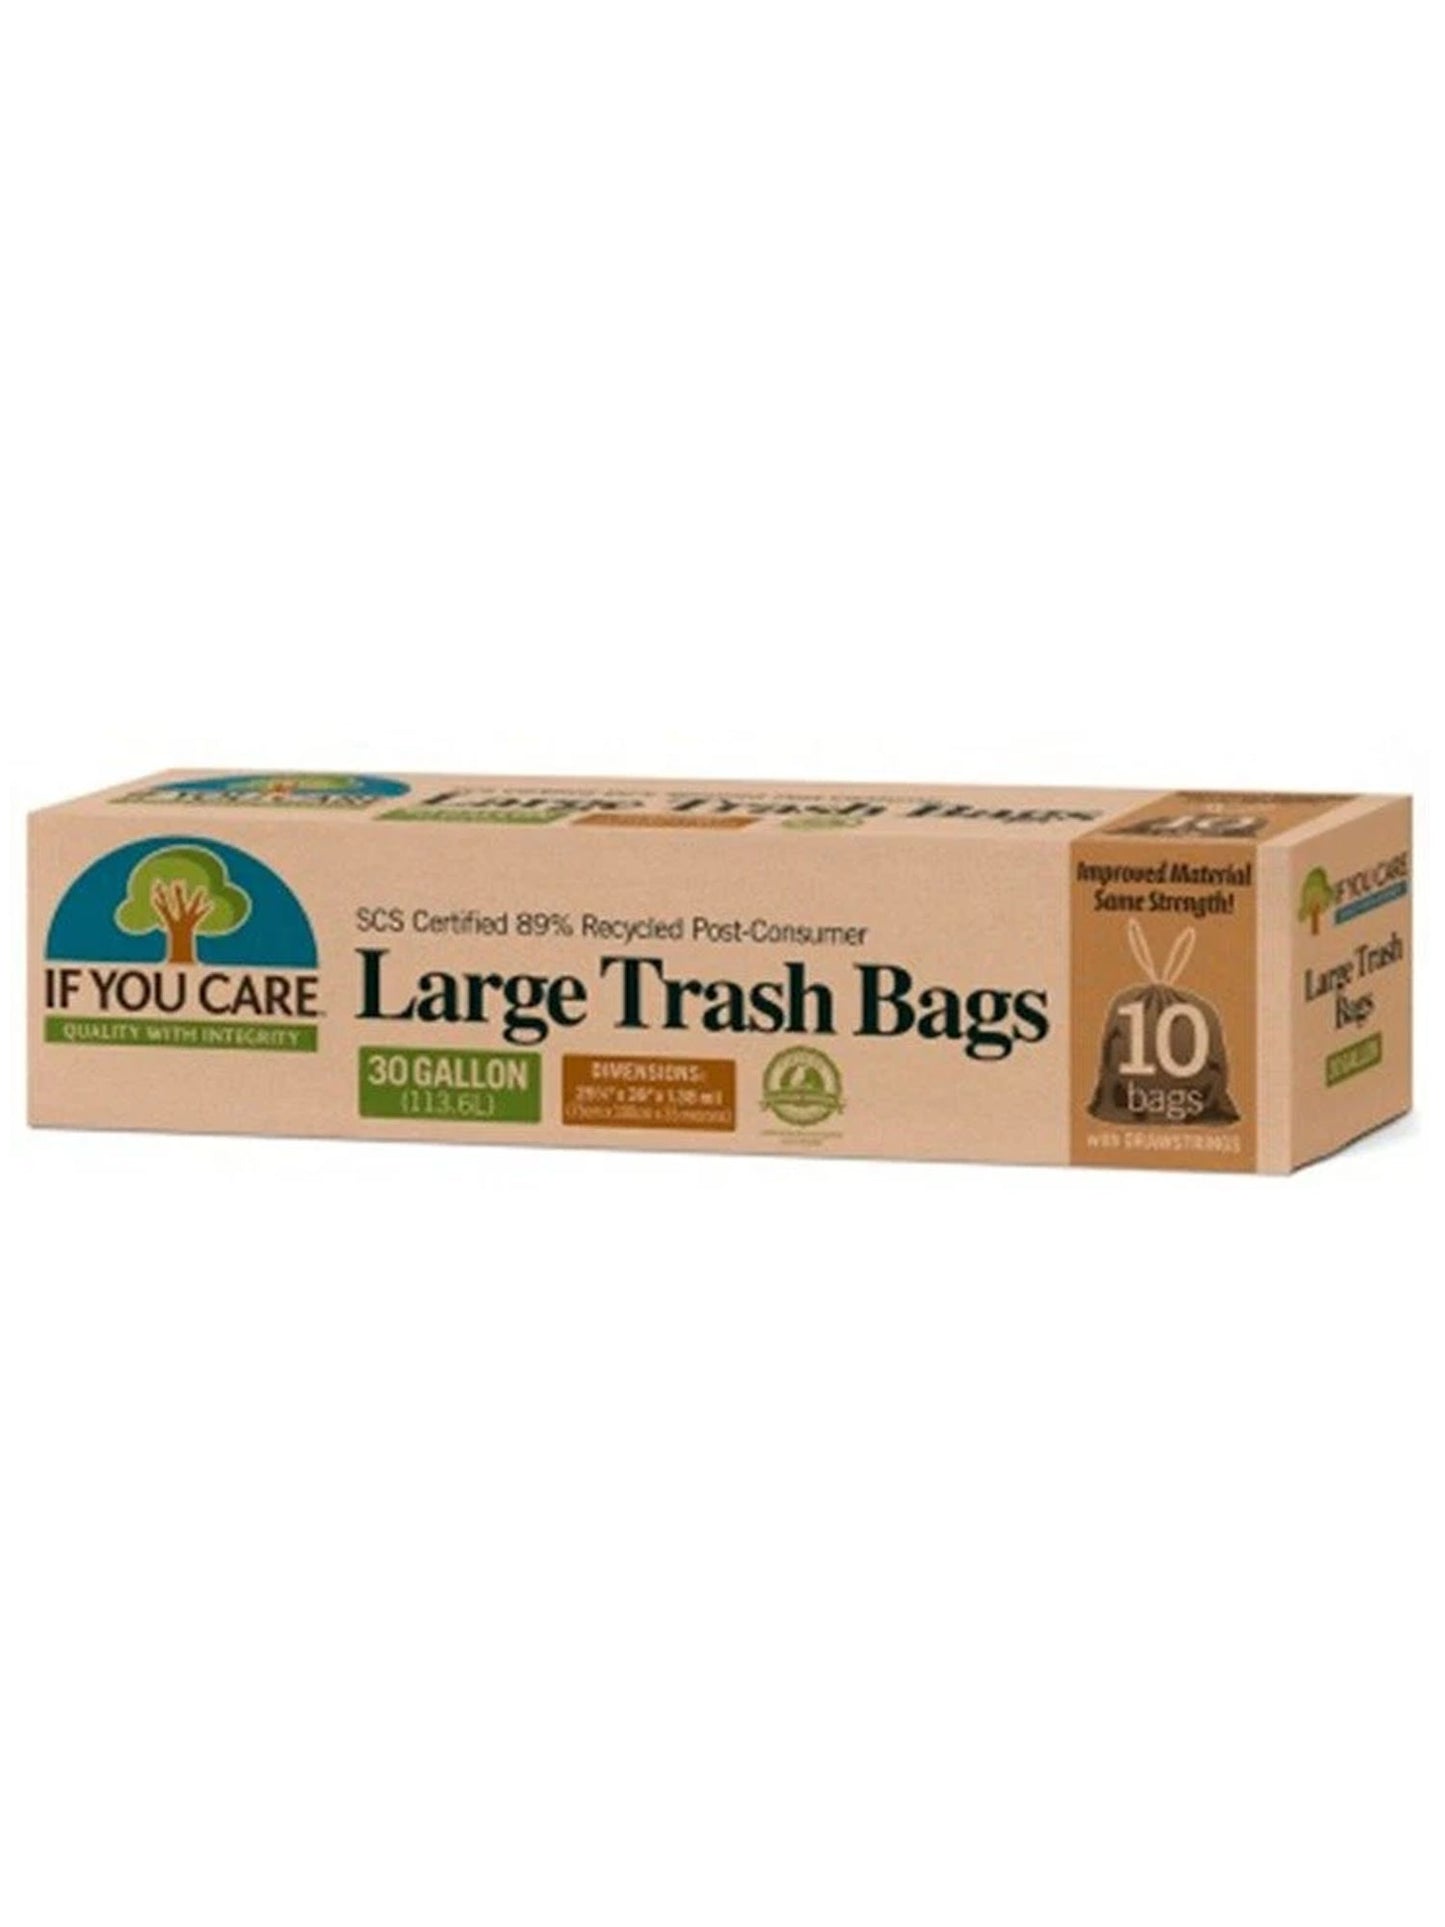 If You Care 89% Recycled 30L Trash Bags 10 Bags